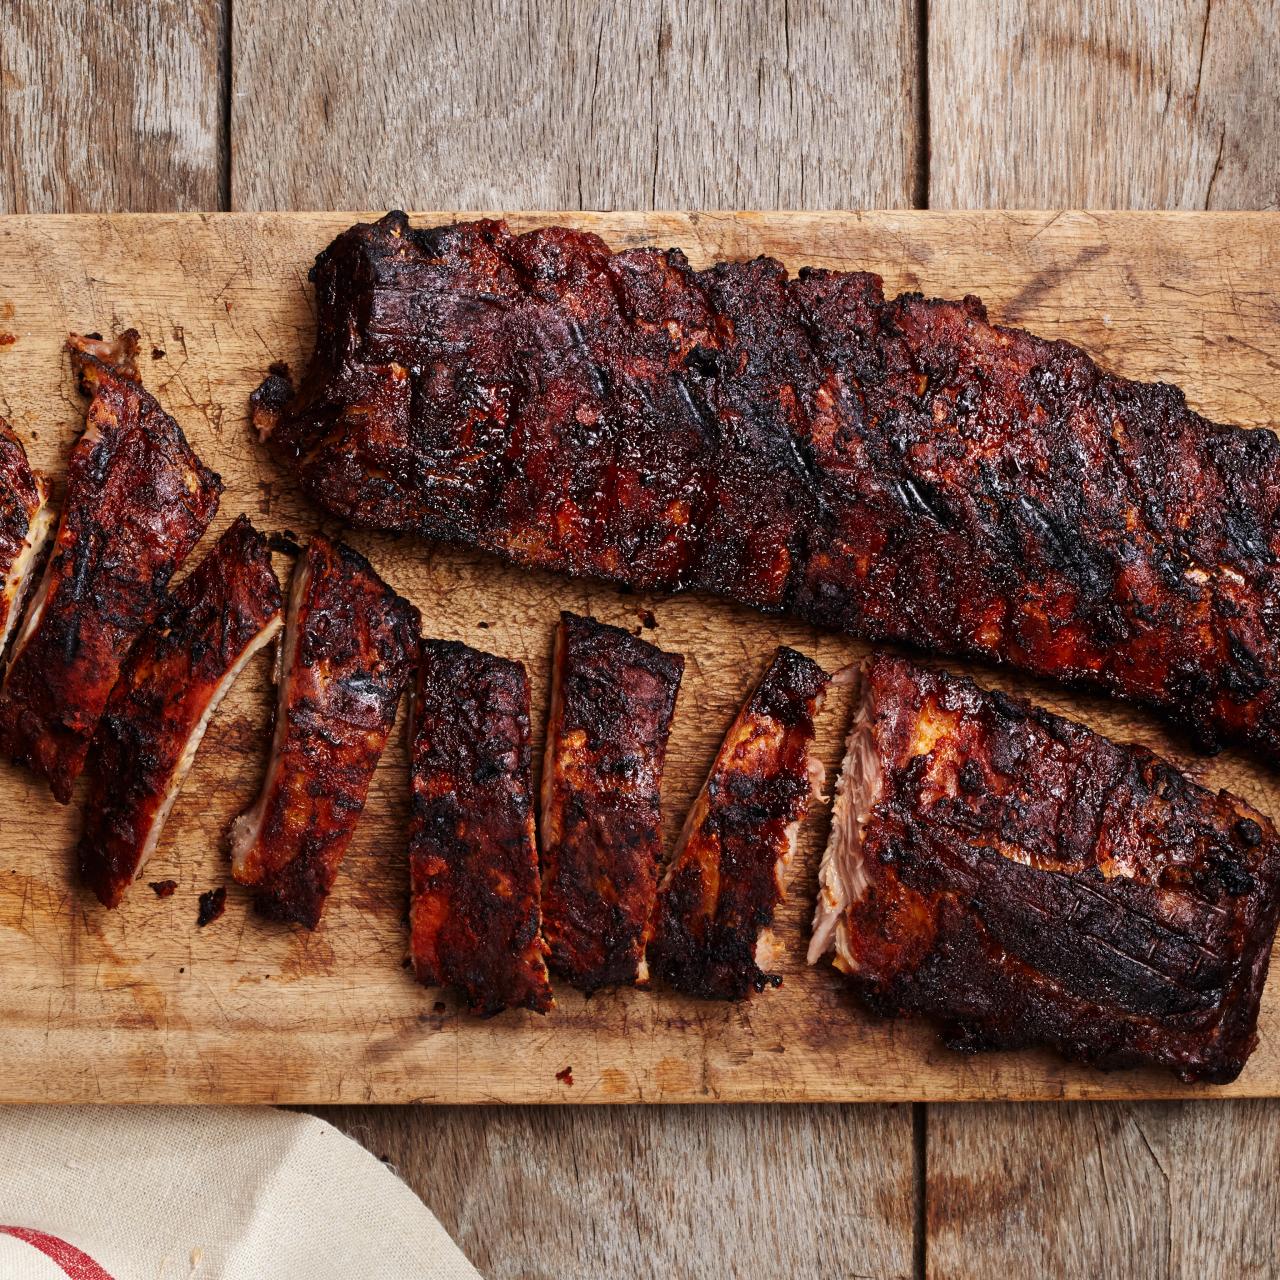 6 Must-Haves for a Master Barbeque - Calendar